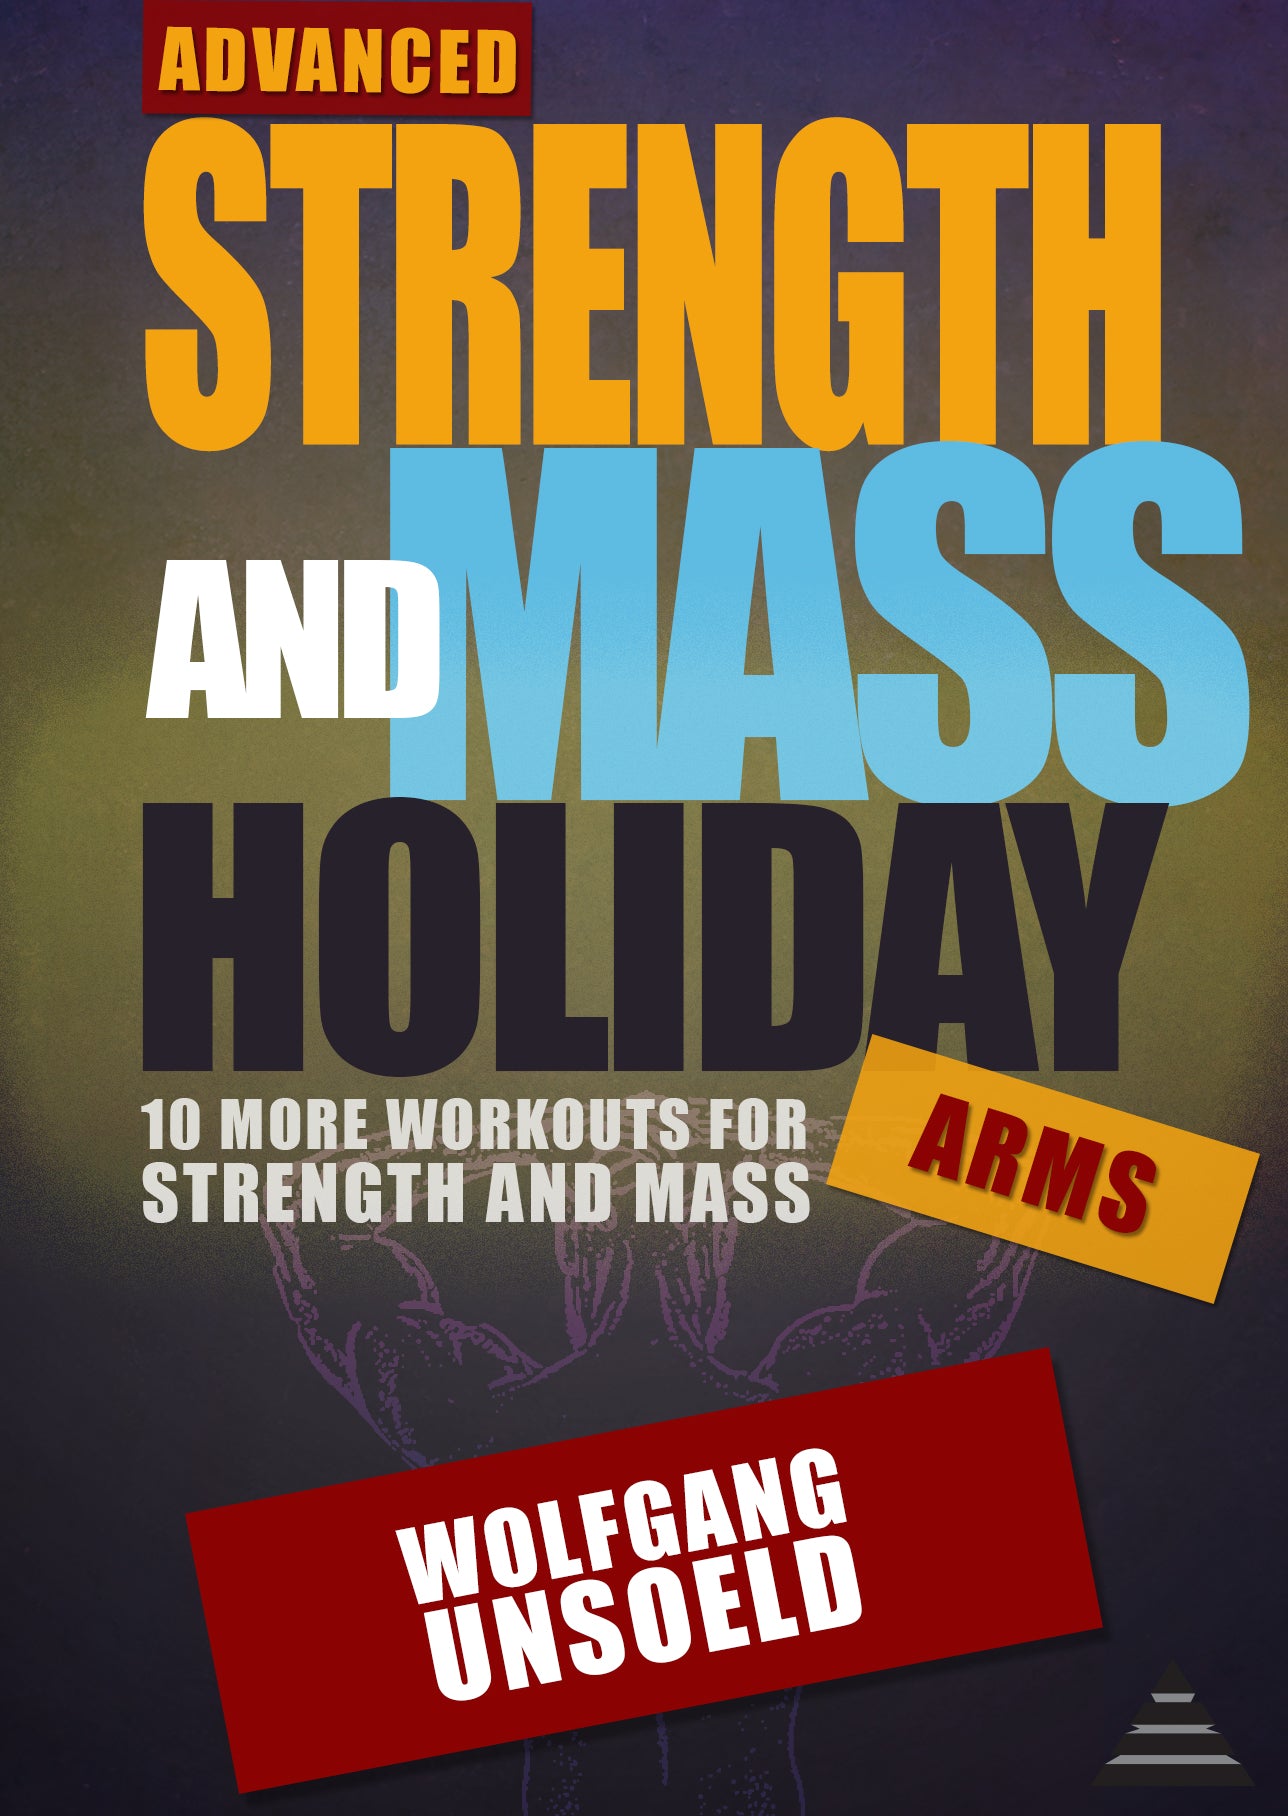 eBook &amp; Videos - Advanced Strength and Mass Holiday